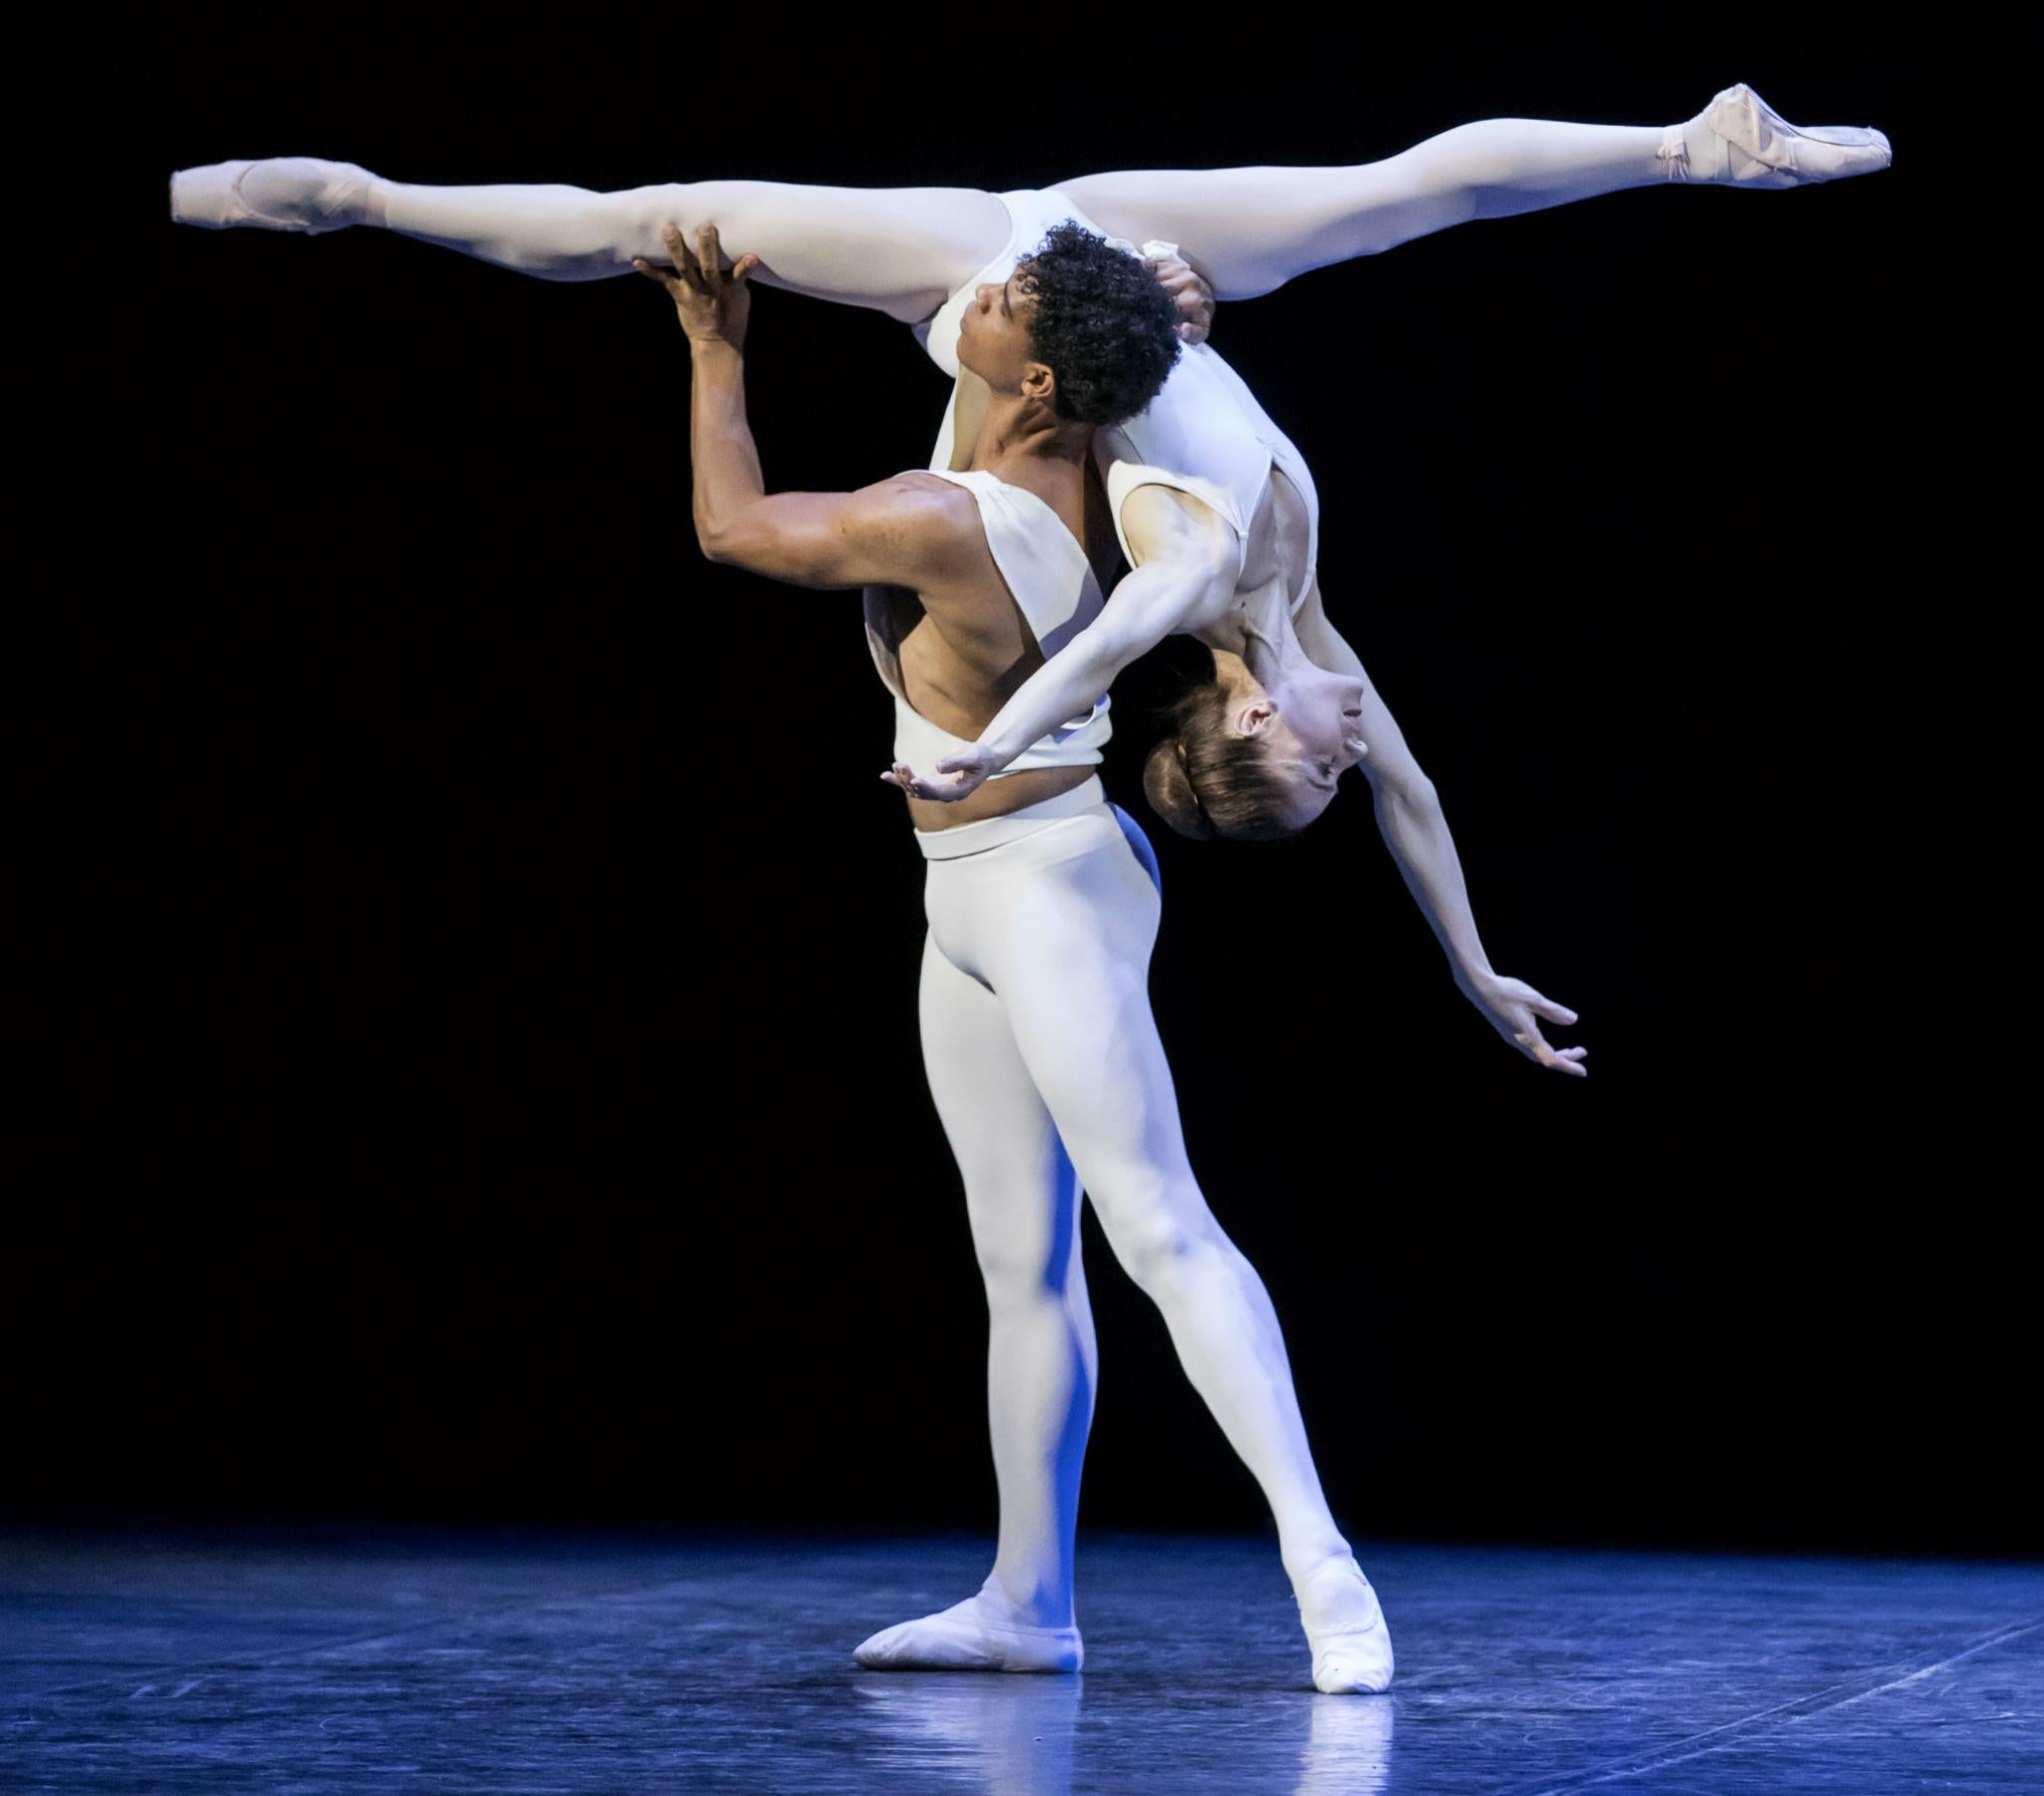 Marianela Nuñez and Acosta in his farewell show at the Royal Albert Hall